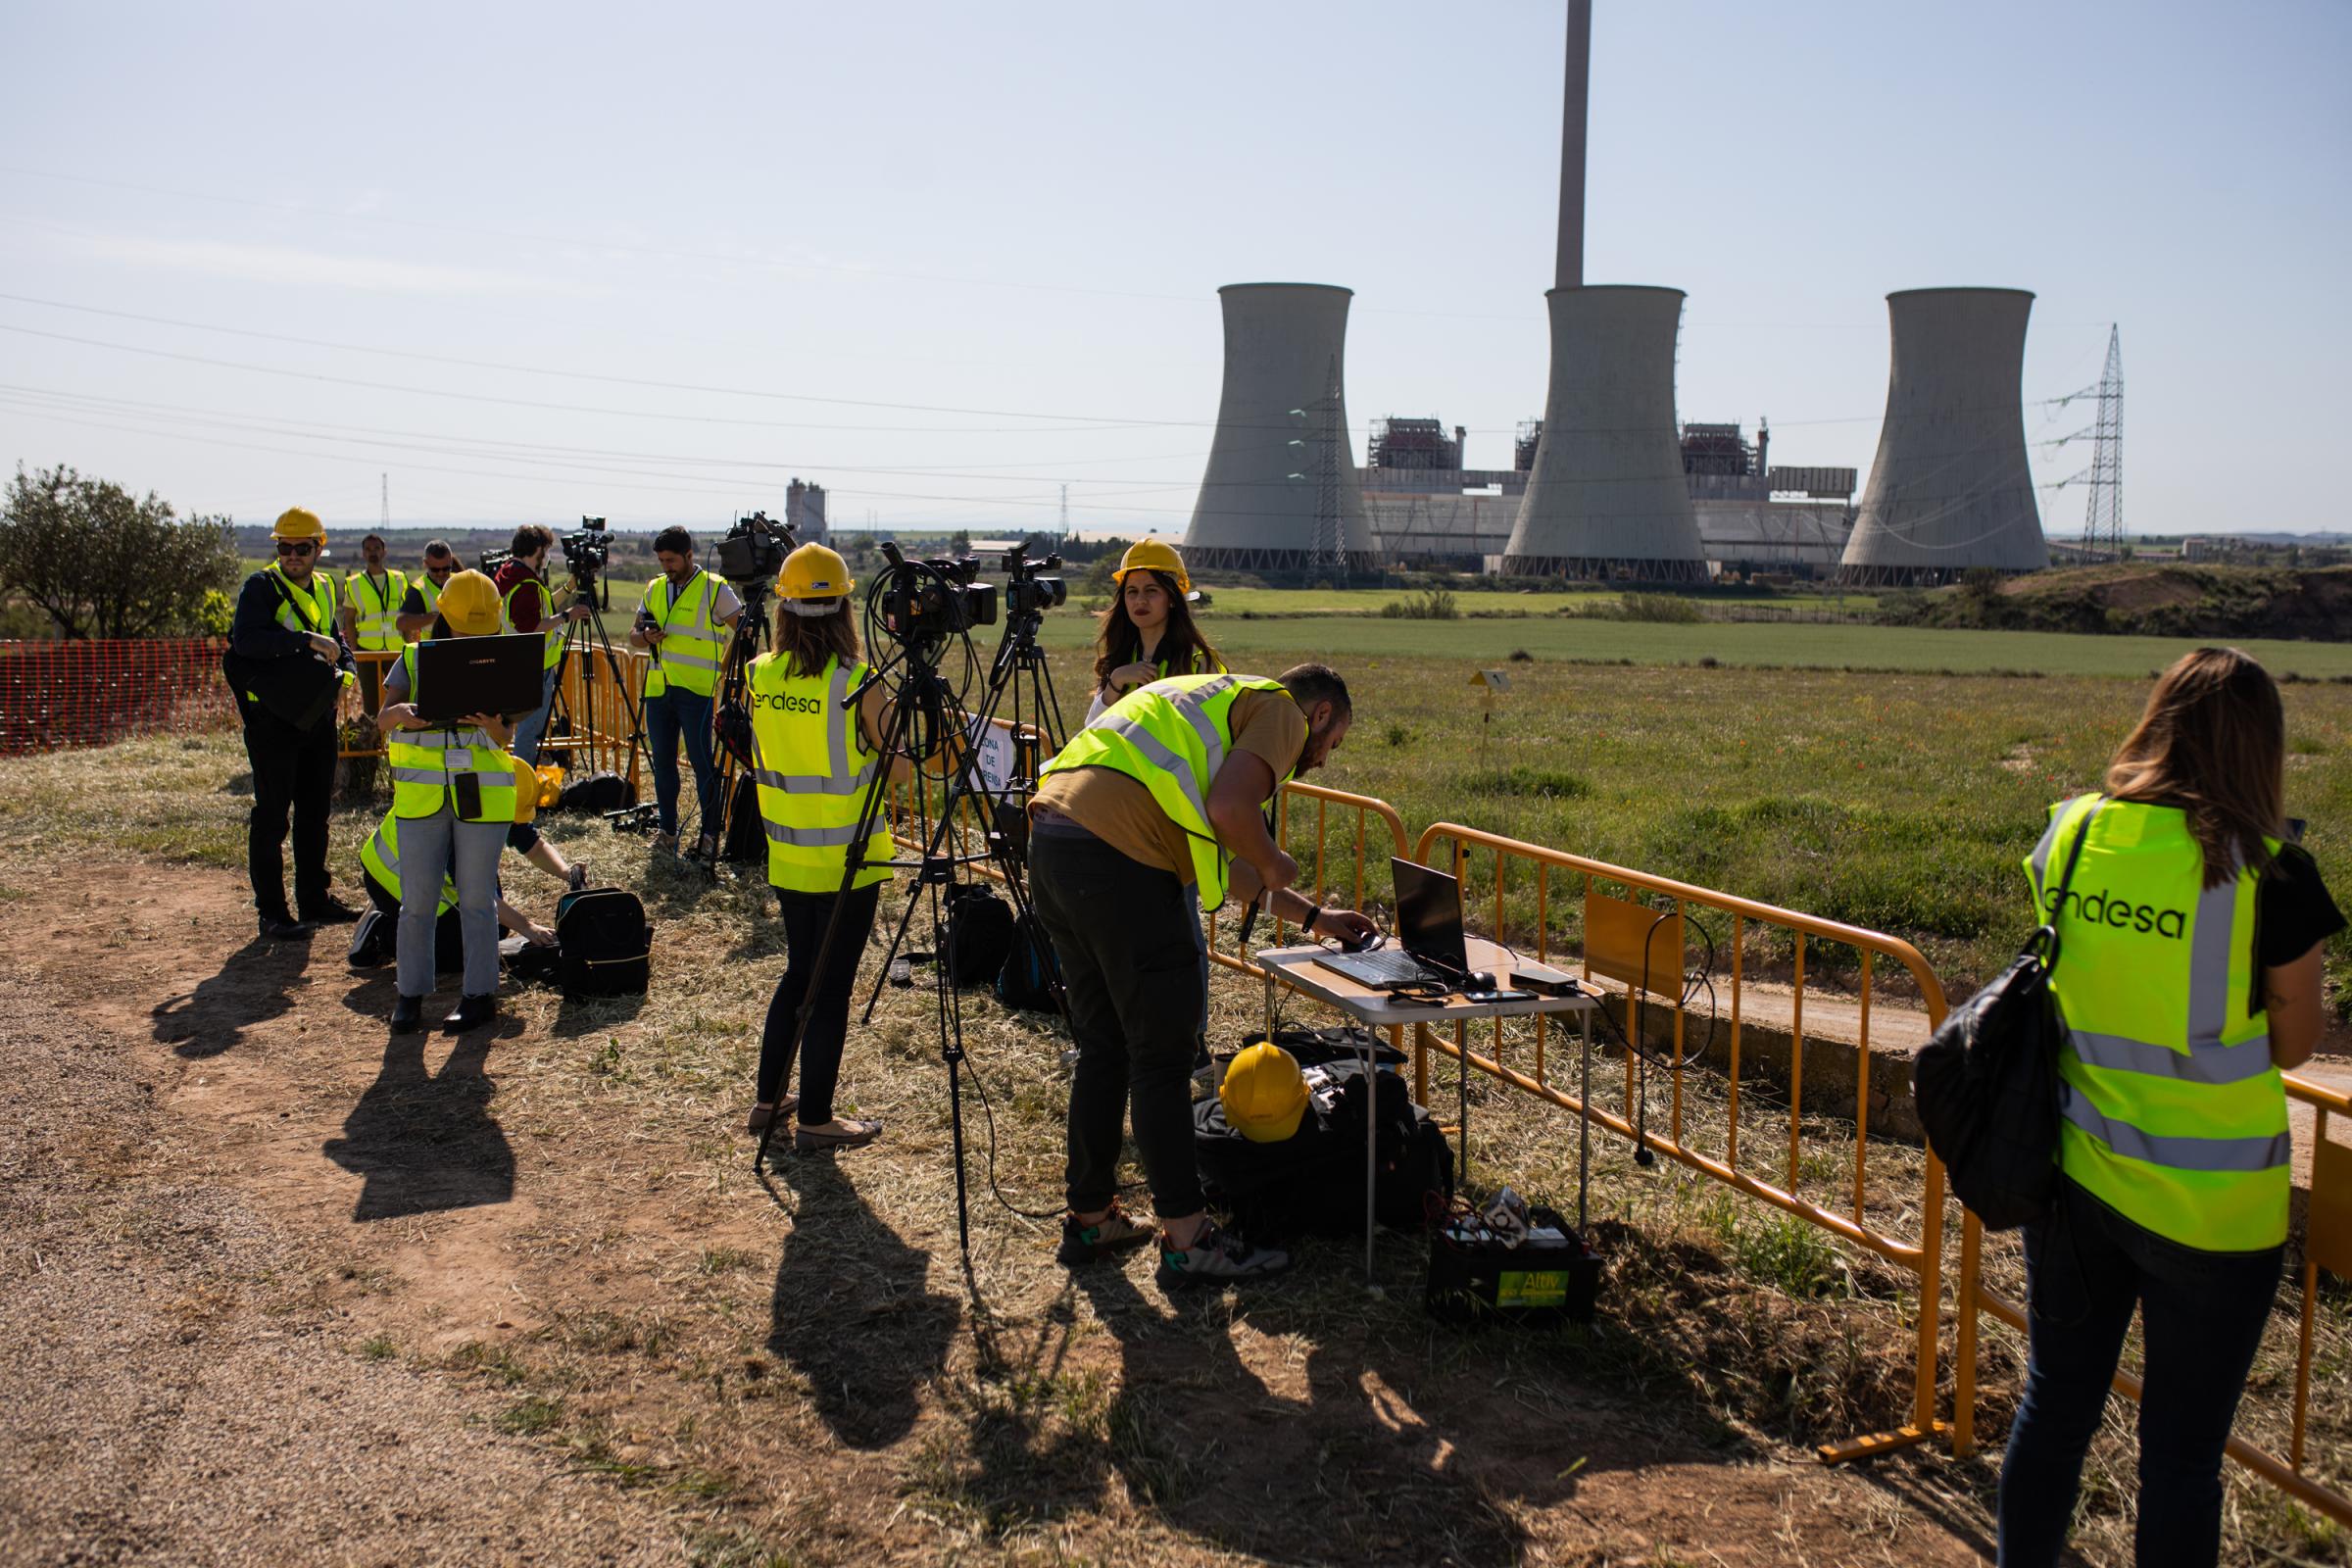 Demolition Of Andorra's Thermal Power Plants - ANDORRA, SPAIN - 13 MAY: More than 30 media have been...